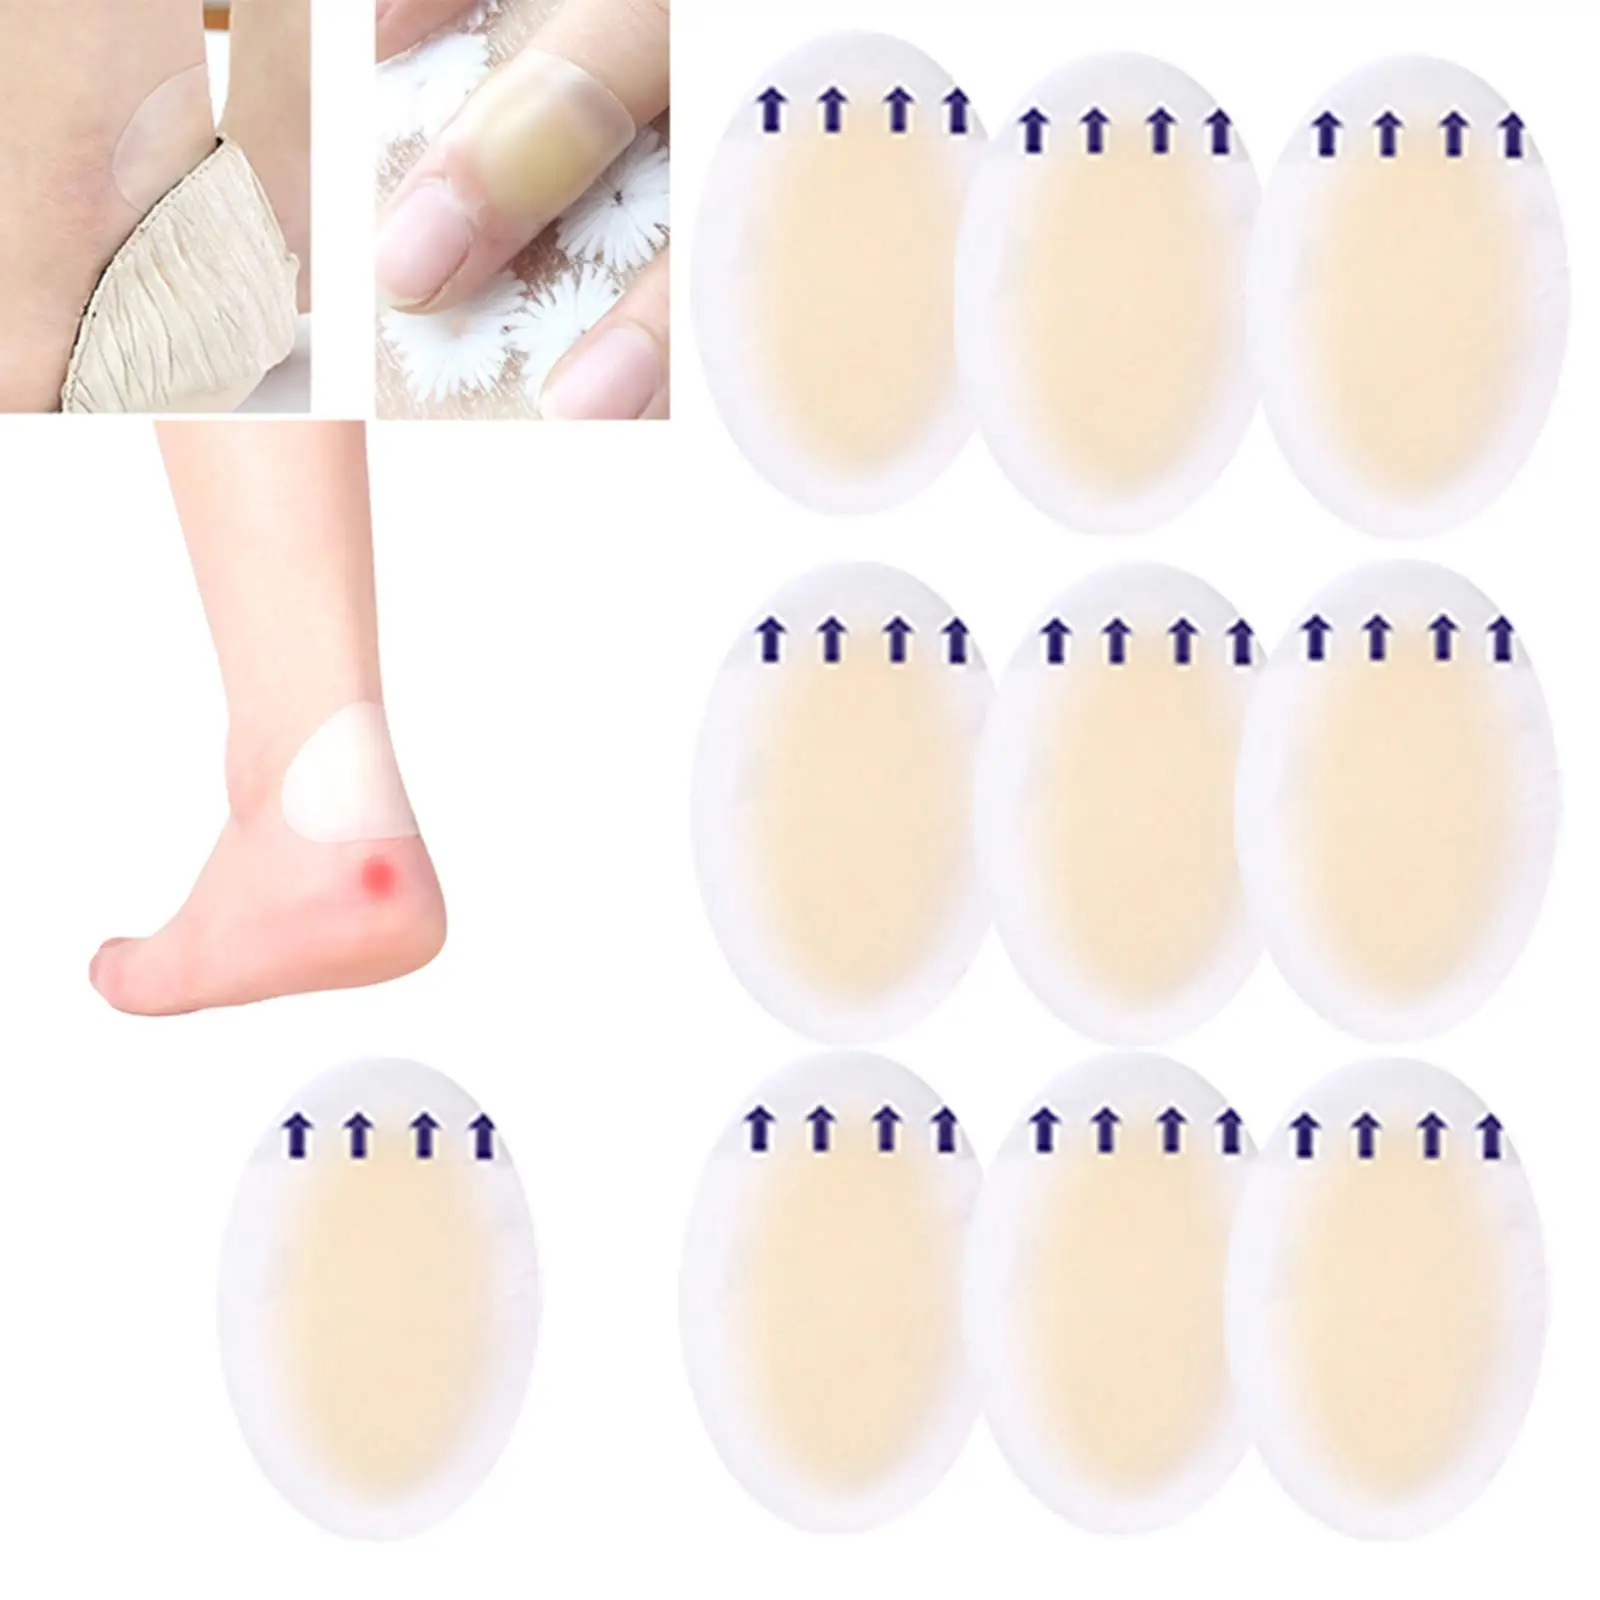 10Pcs Gel Shoes Stickers, Patch Heel Pad Protection heel Soft Hydrocolloid Pads Foot Care for Sports Shoes High Heels